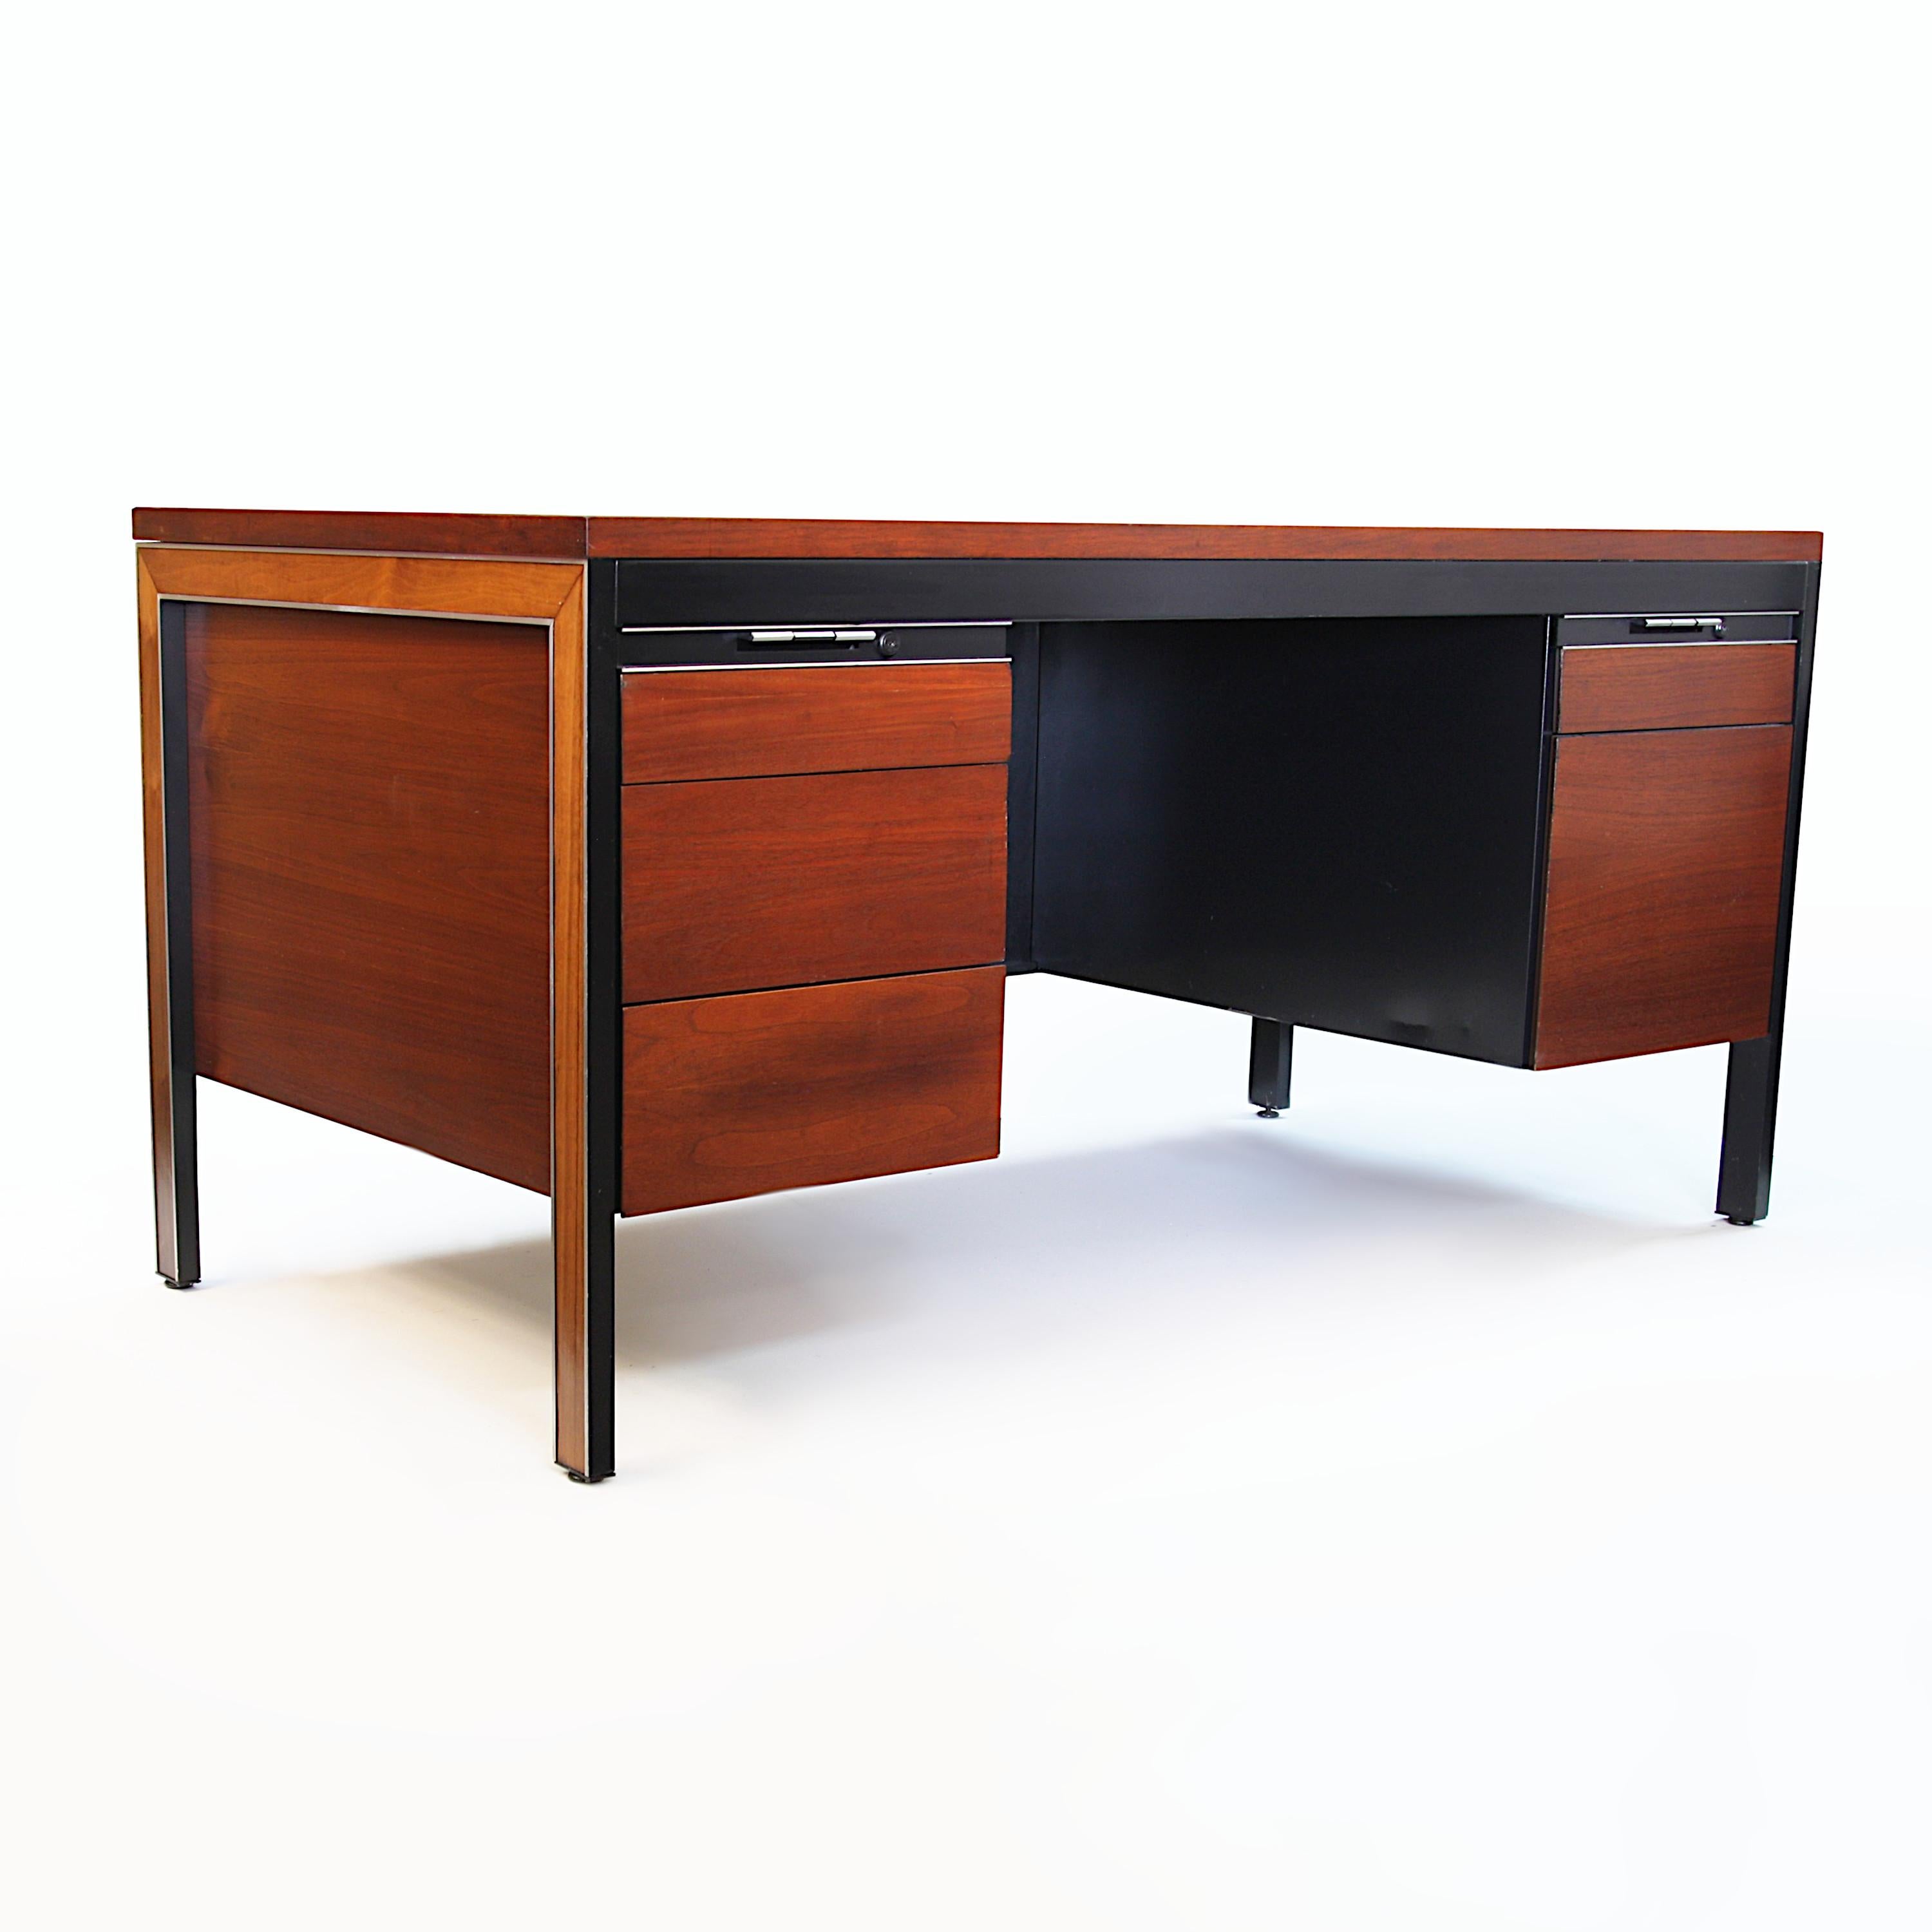 This ultra-rare and ultra-cool desk features a black steel frame, walnut veneer cabinet and brushed-aluminum legs with rosewood inlay. The contrasting woods, aluminum accents and minimalist, mid-century lines, make this desk is the epitome of 70's